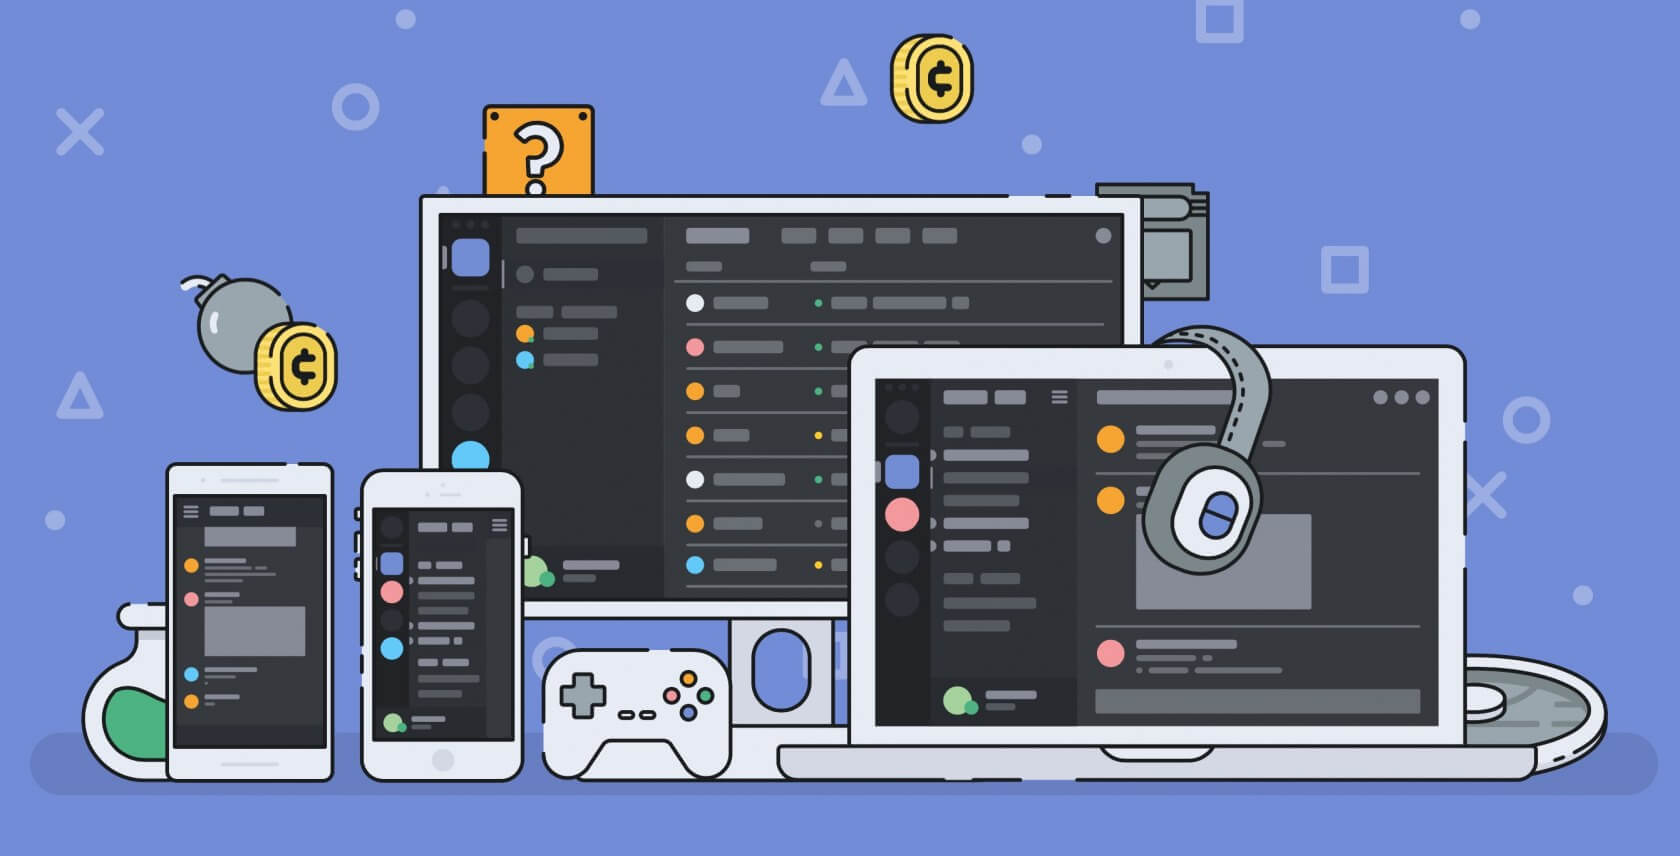 Discord might be throttling your Nvidia GPU's memory, but here's how you can fix it